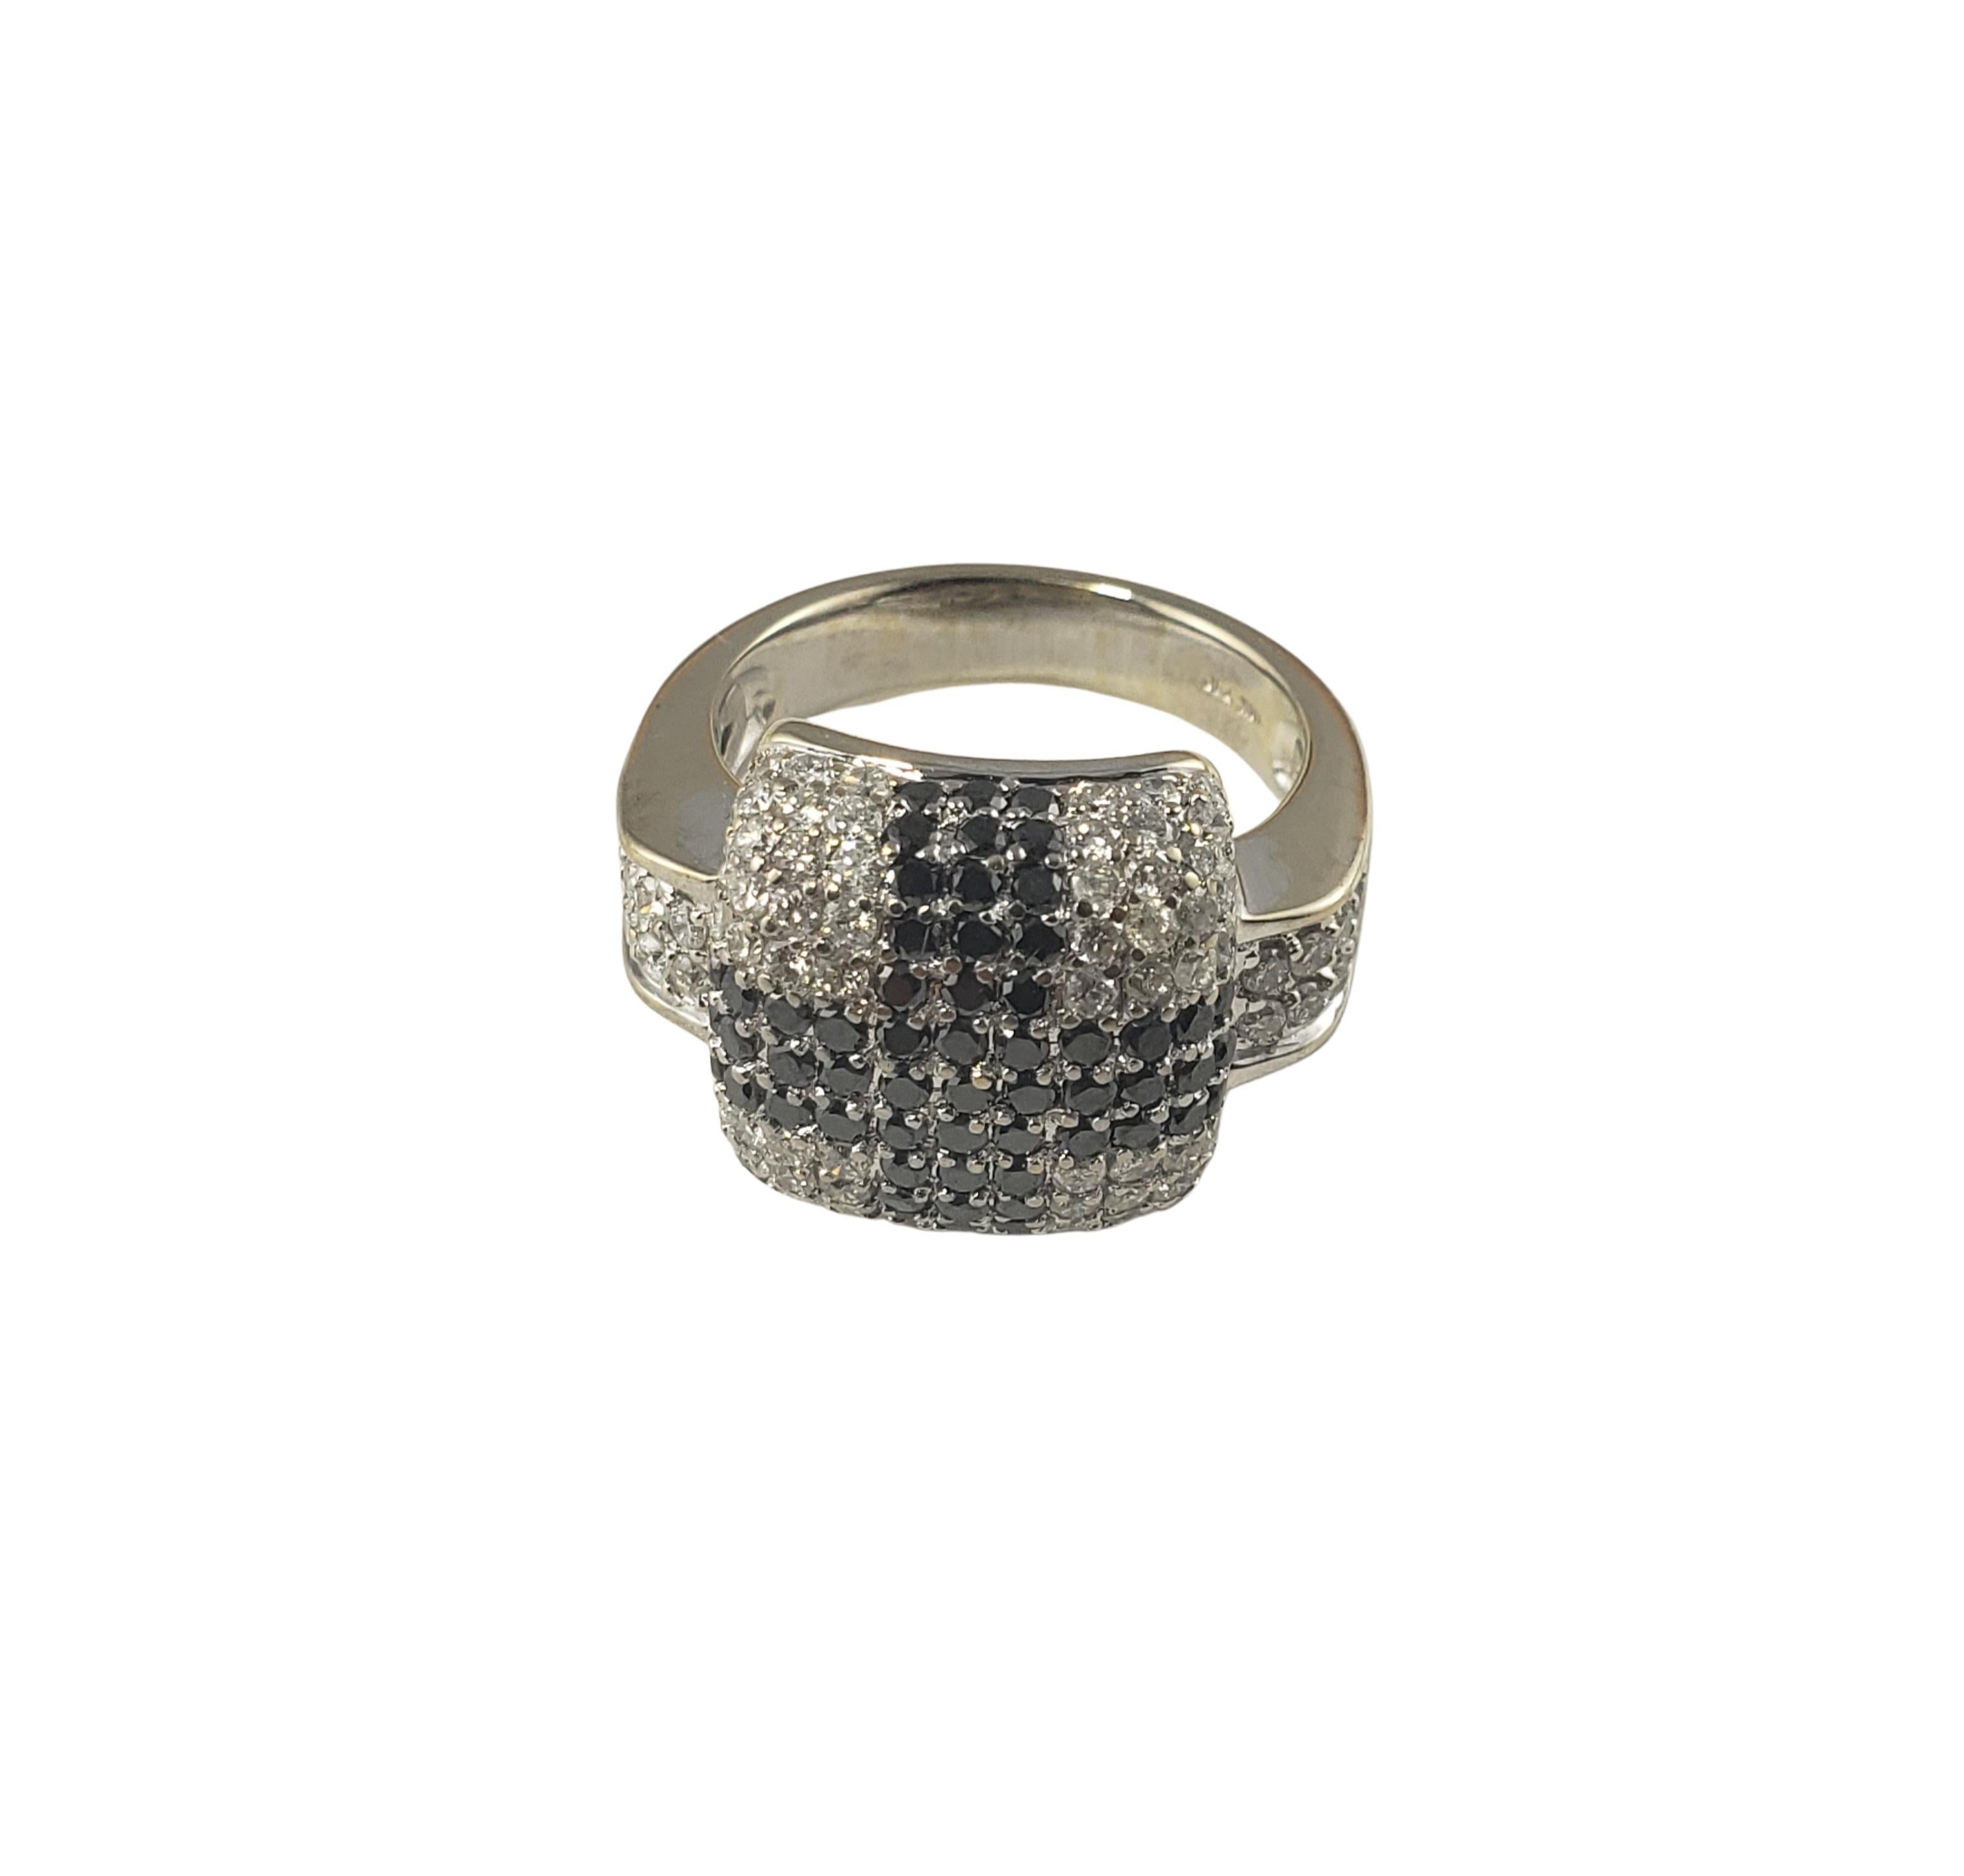 Vintage 18 Karat White Gold Black and White Diamond Ring Size 6.75-

This sparkling ring features white and black round brilliant cut diamonds set in beautifully detailed 14K white gold  Width: 14 mm.
Shank: 4 mm.

Approximate total diamond weight: